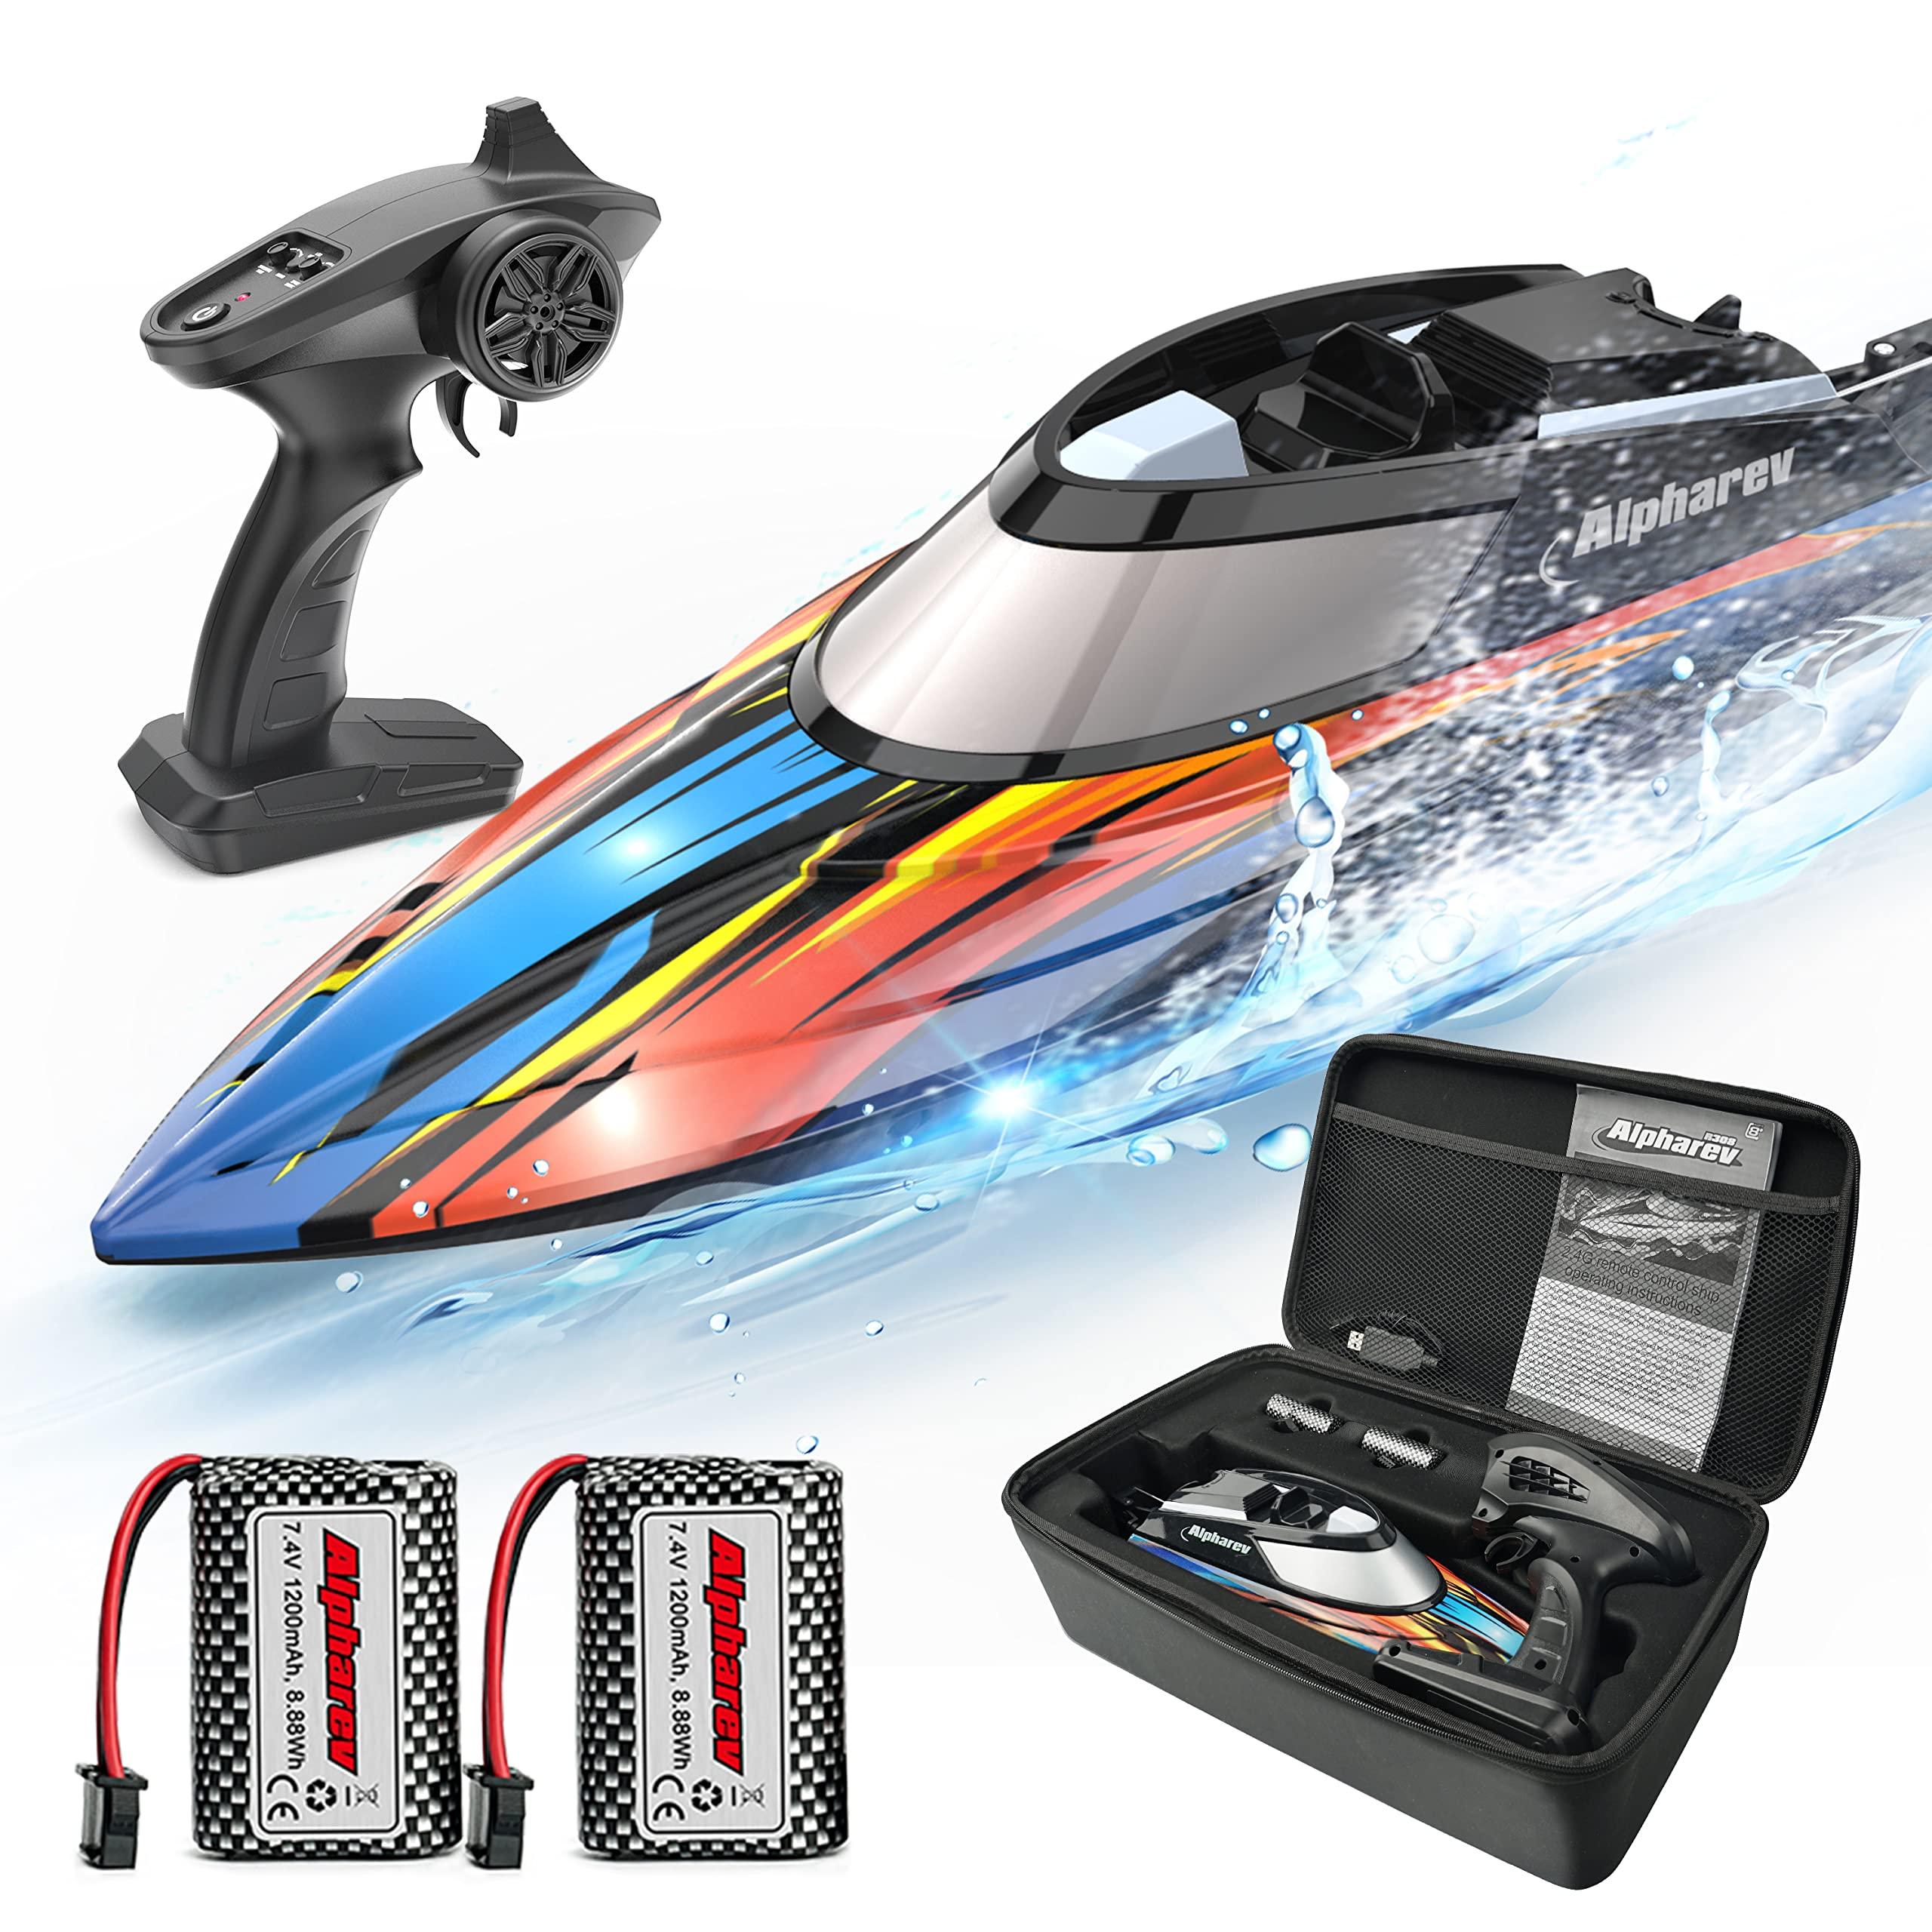 W 09 Rc Boat: Excellent Remote Control Features